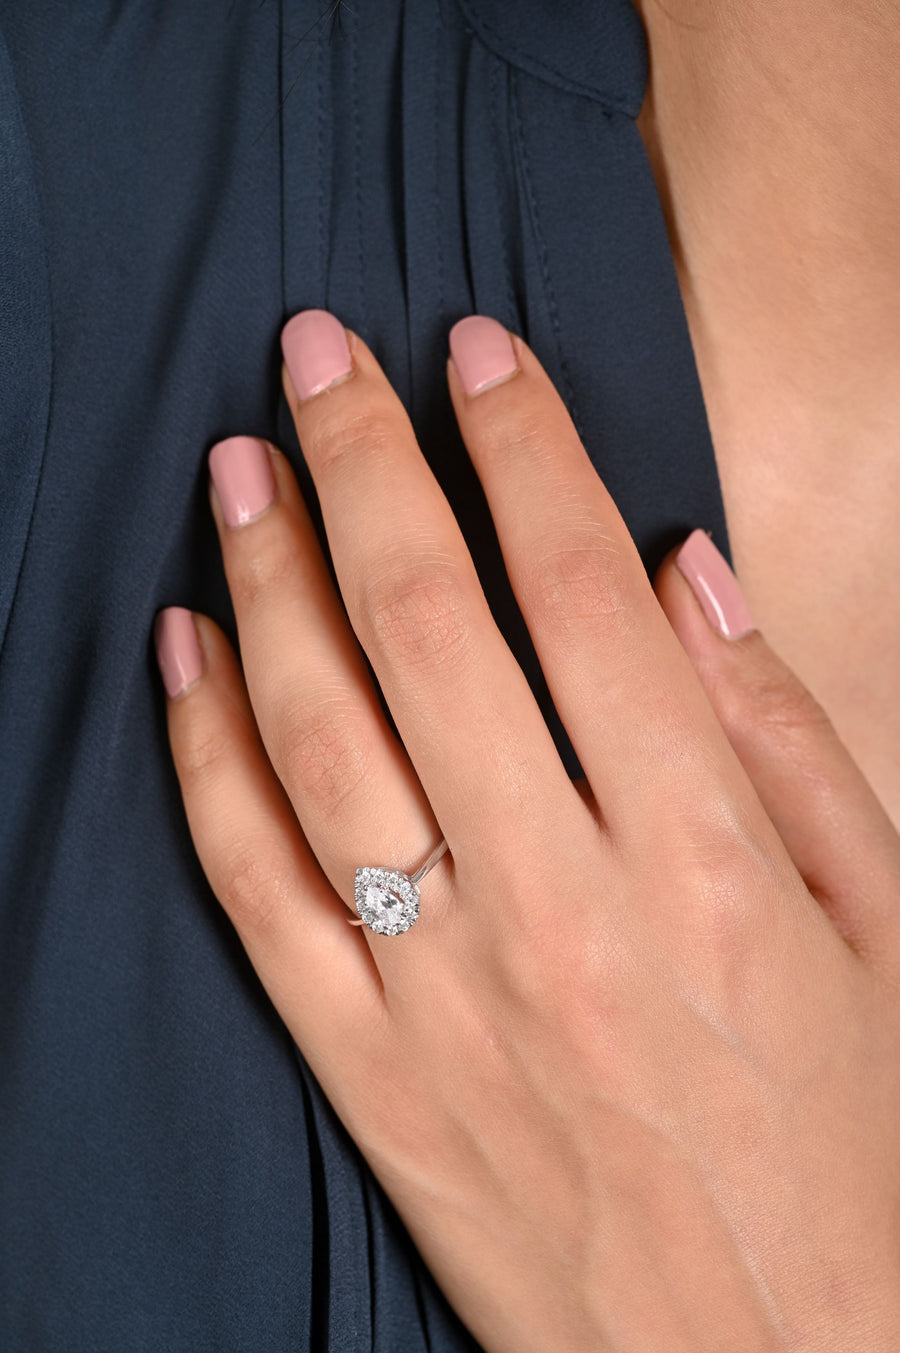 The Pearly Pear Diamond Ring in 18K White Gold